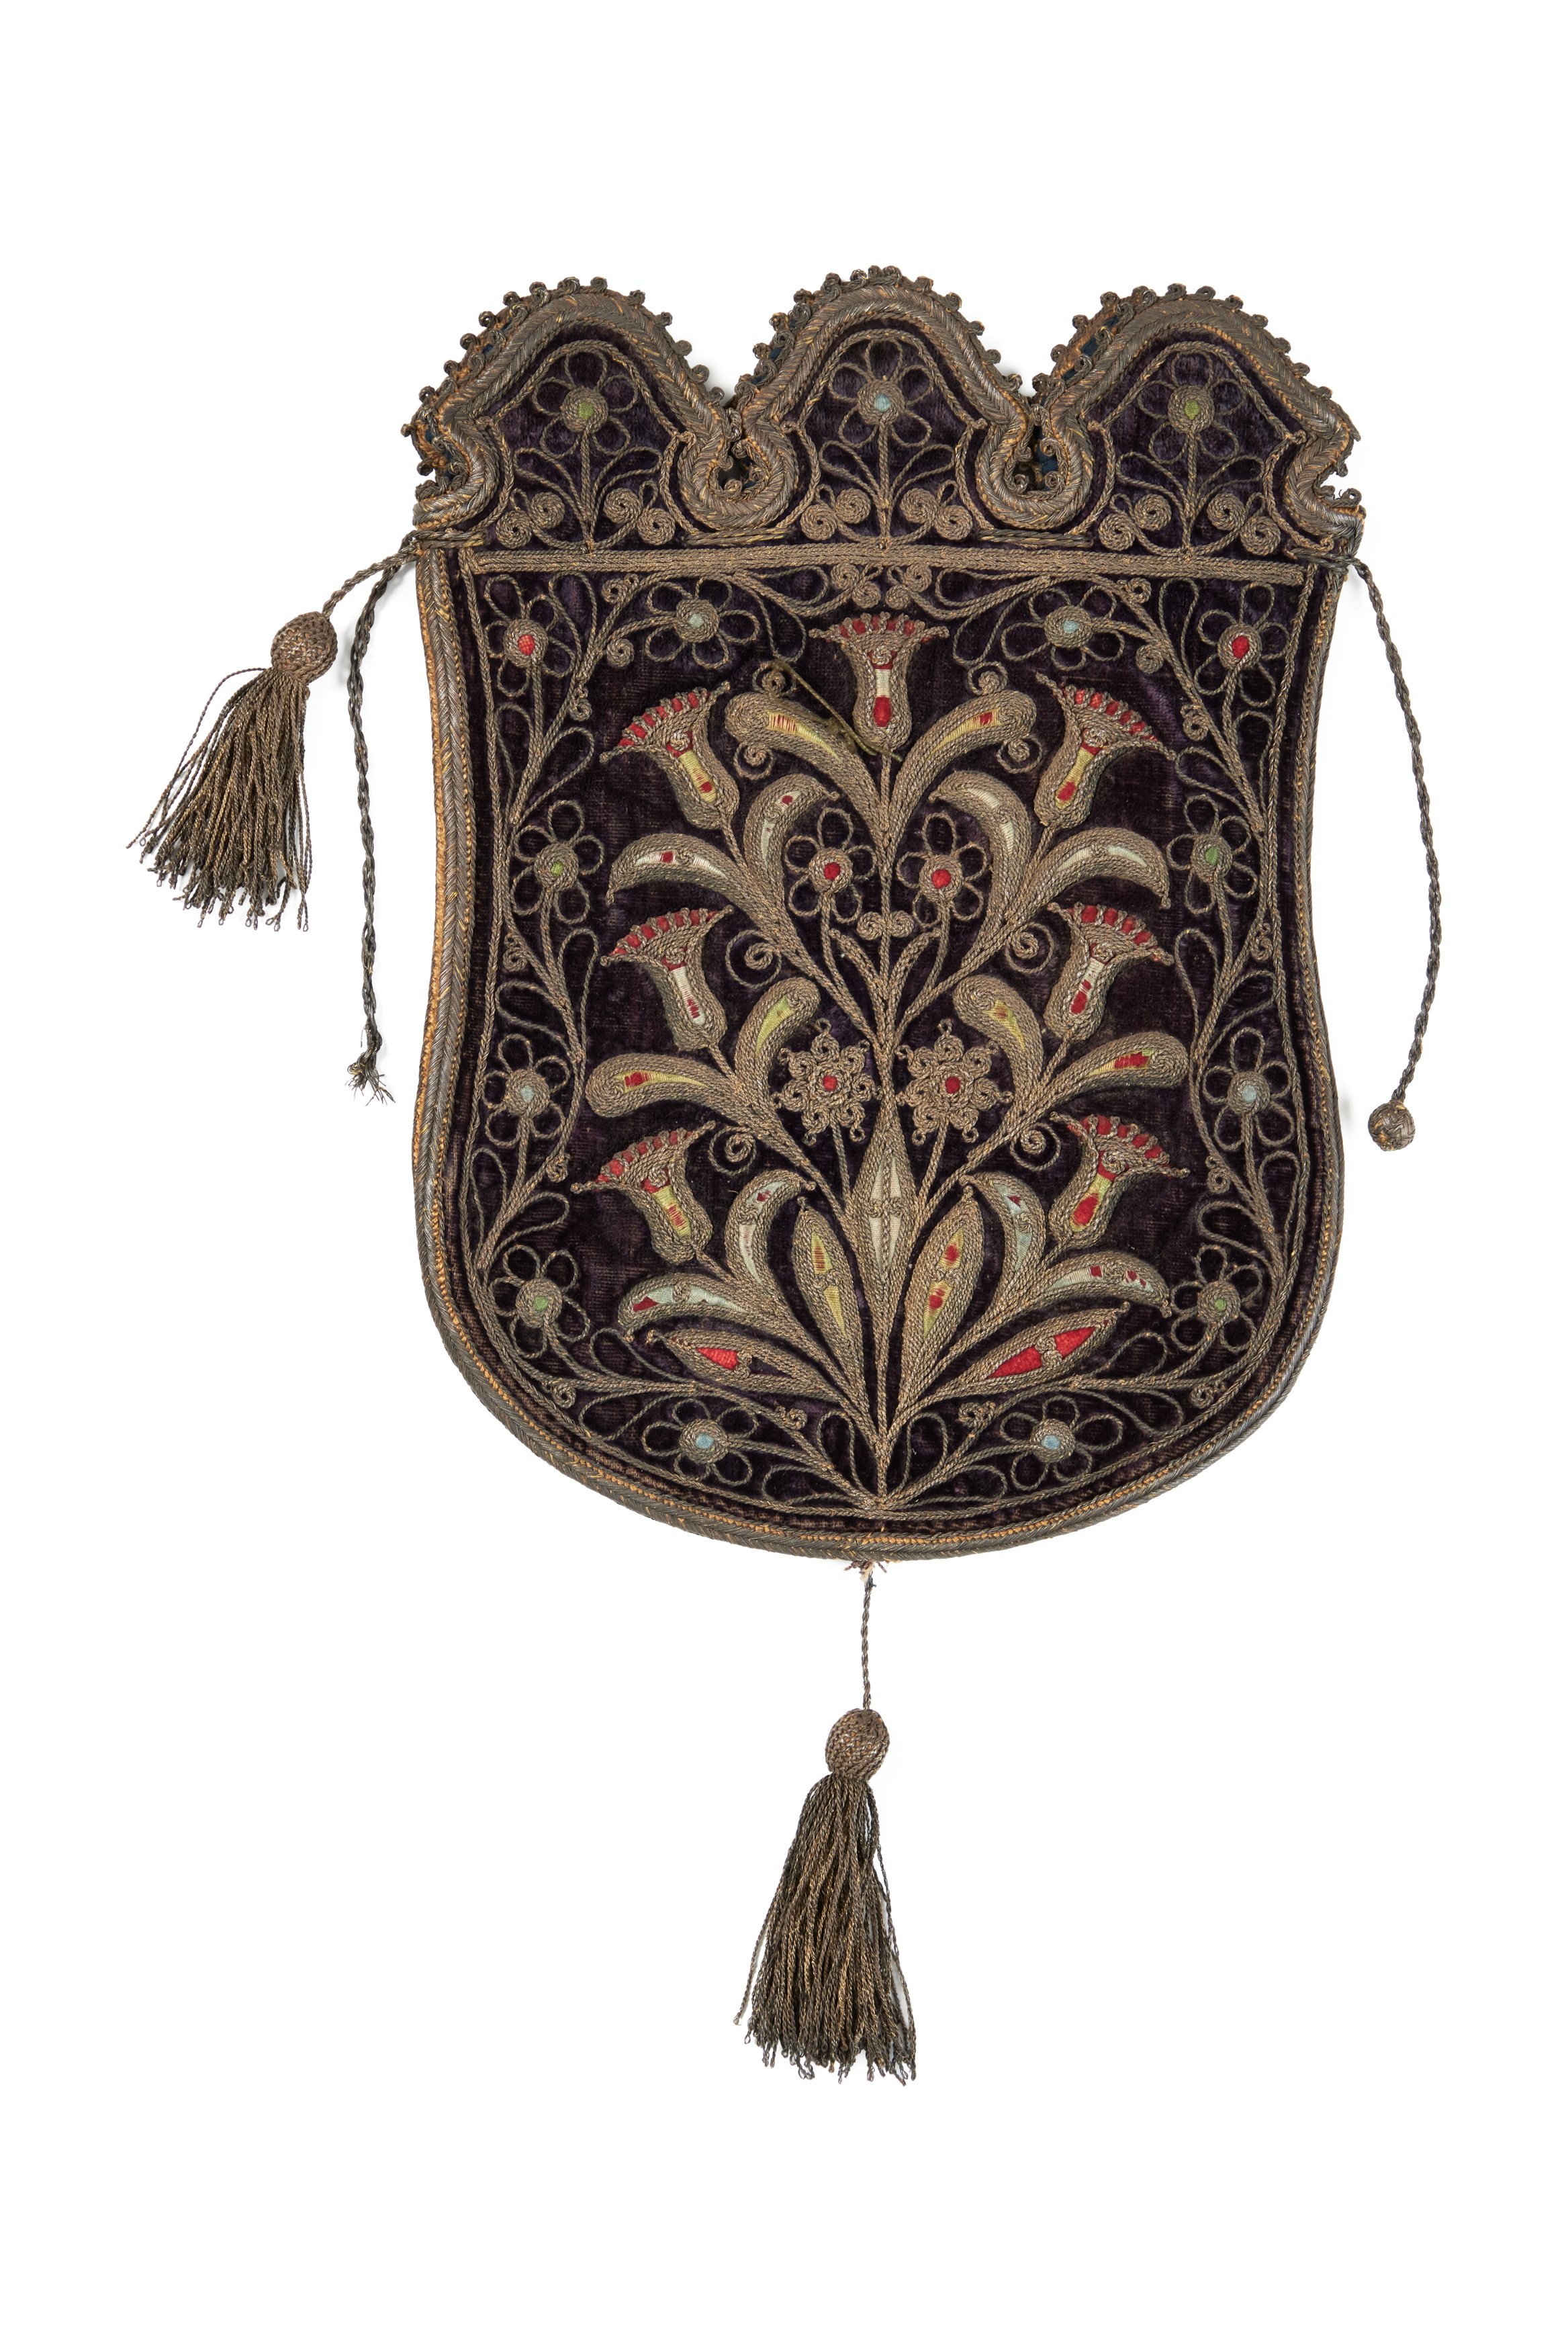 A pouch with embroidered tapestry design